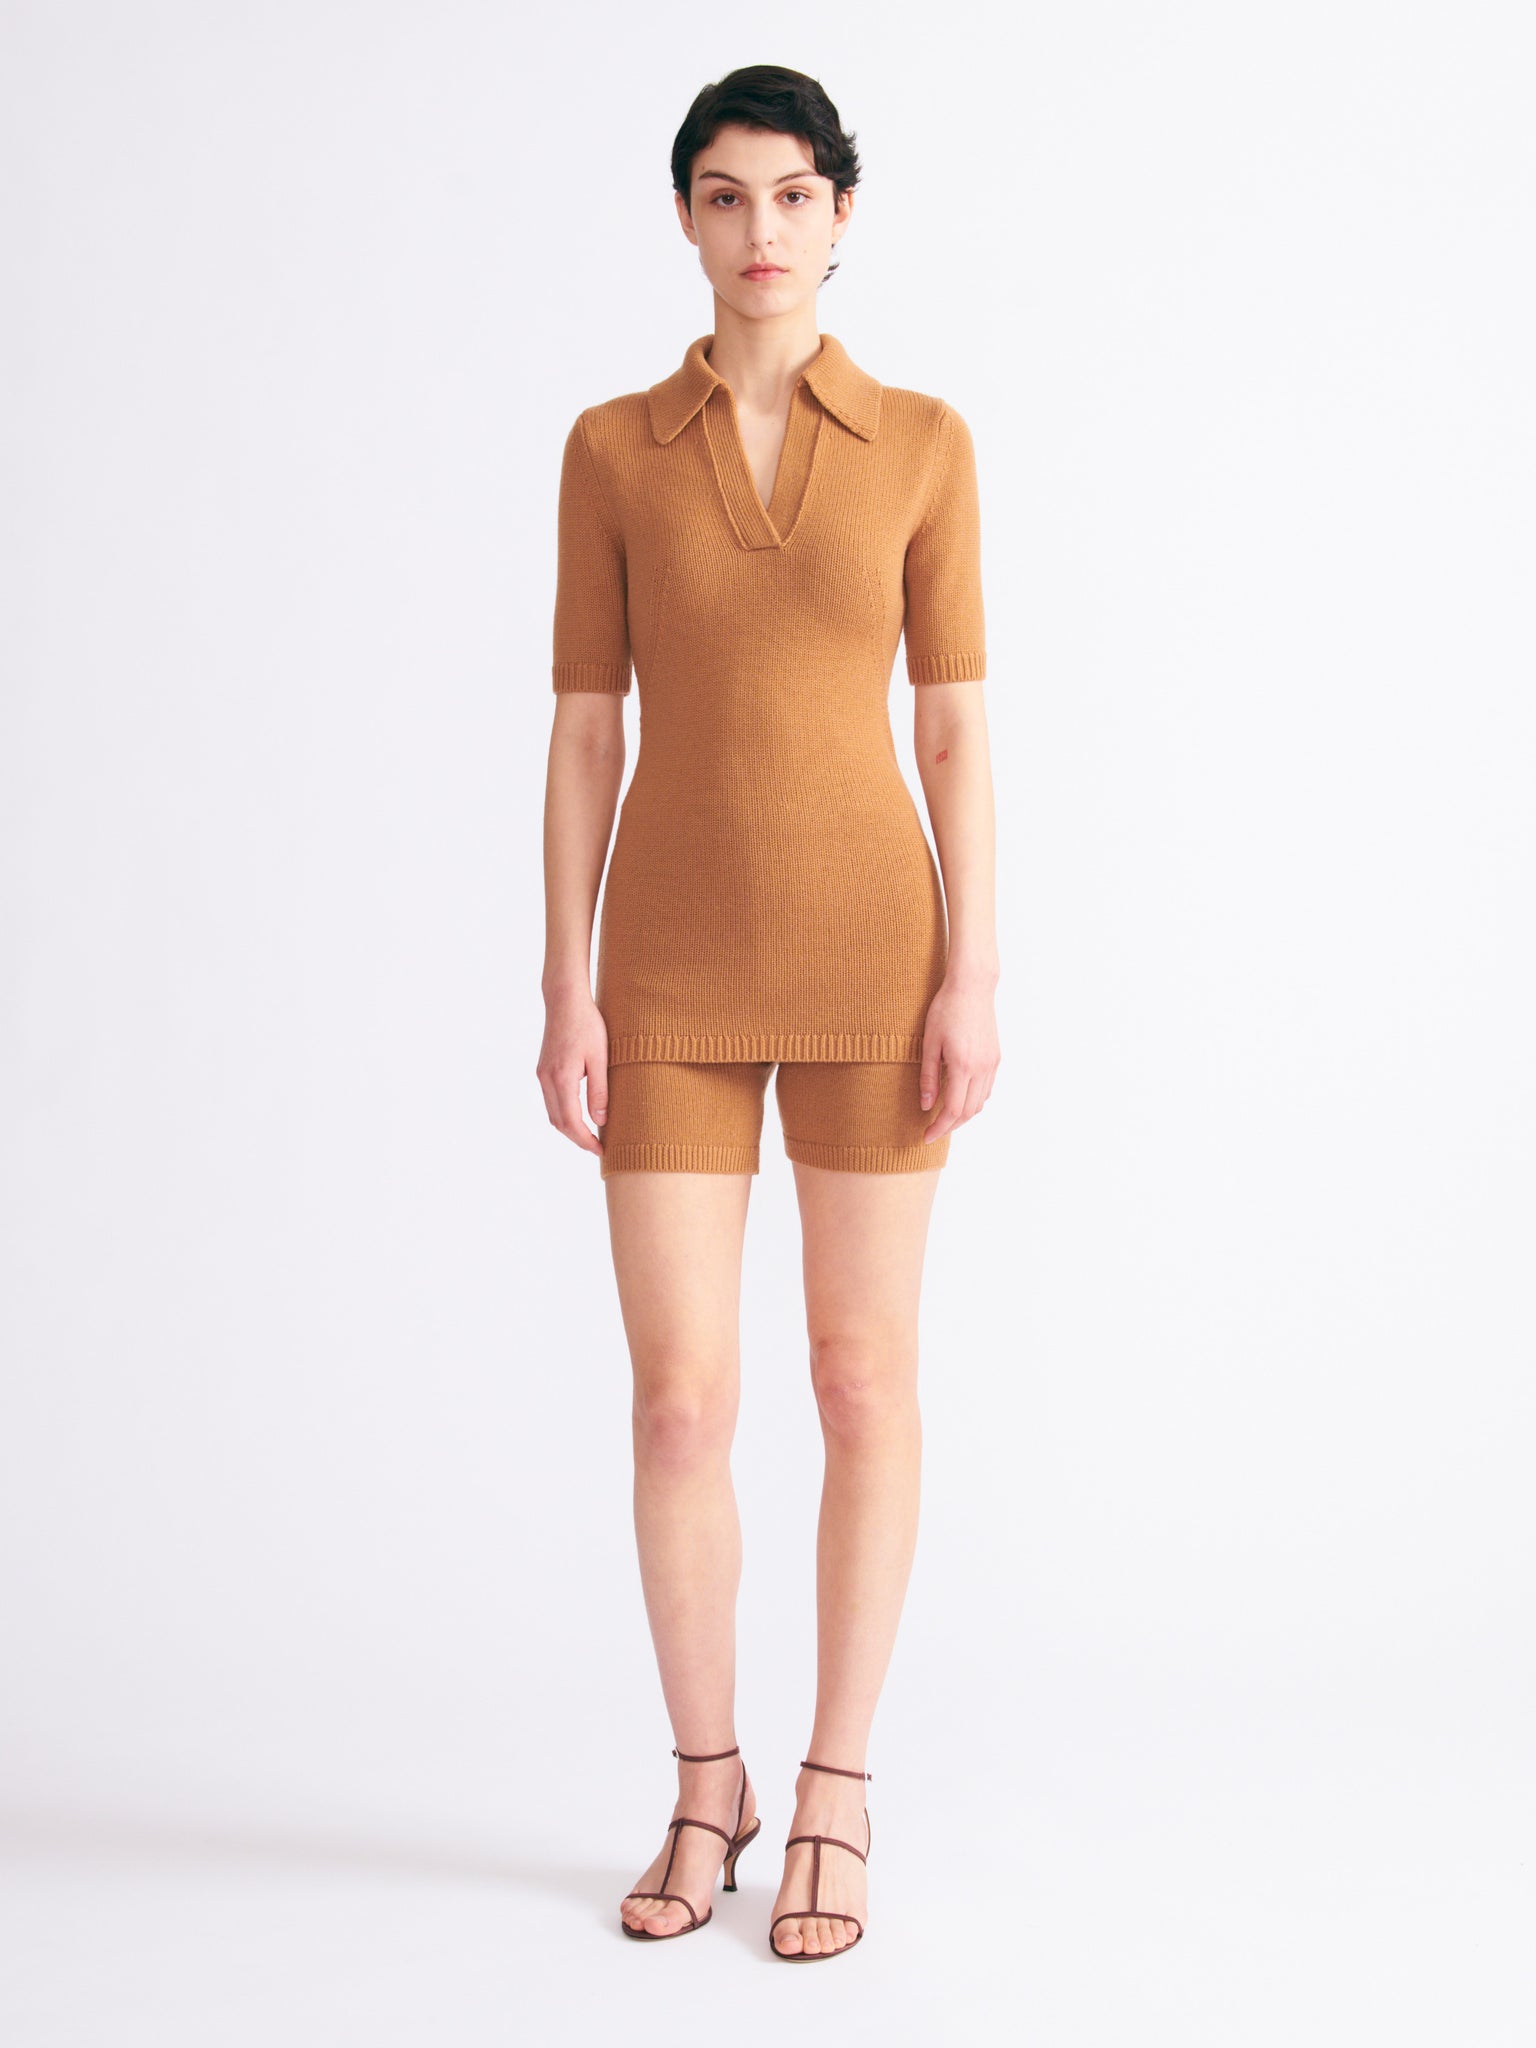 Dory Tan Knitted Top | Emilia Wickstead